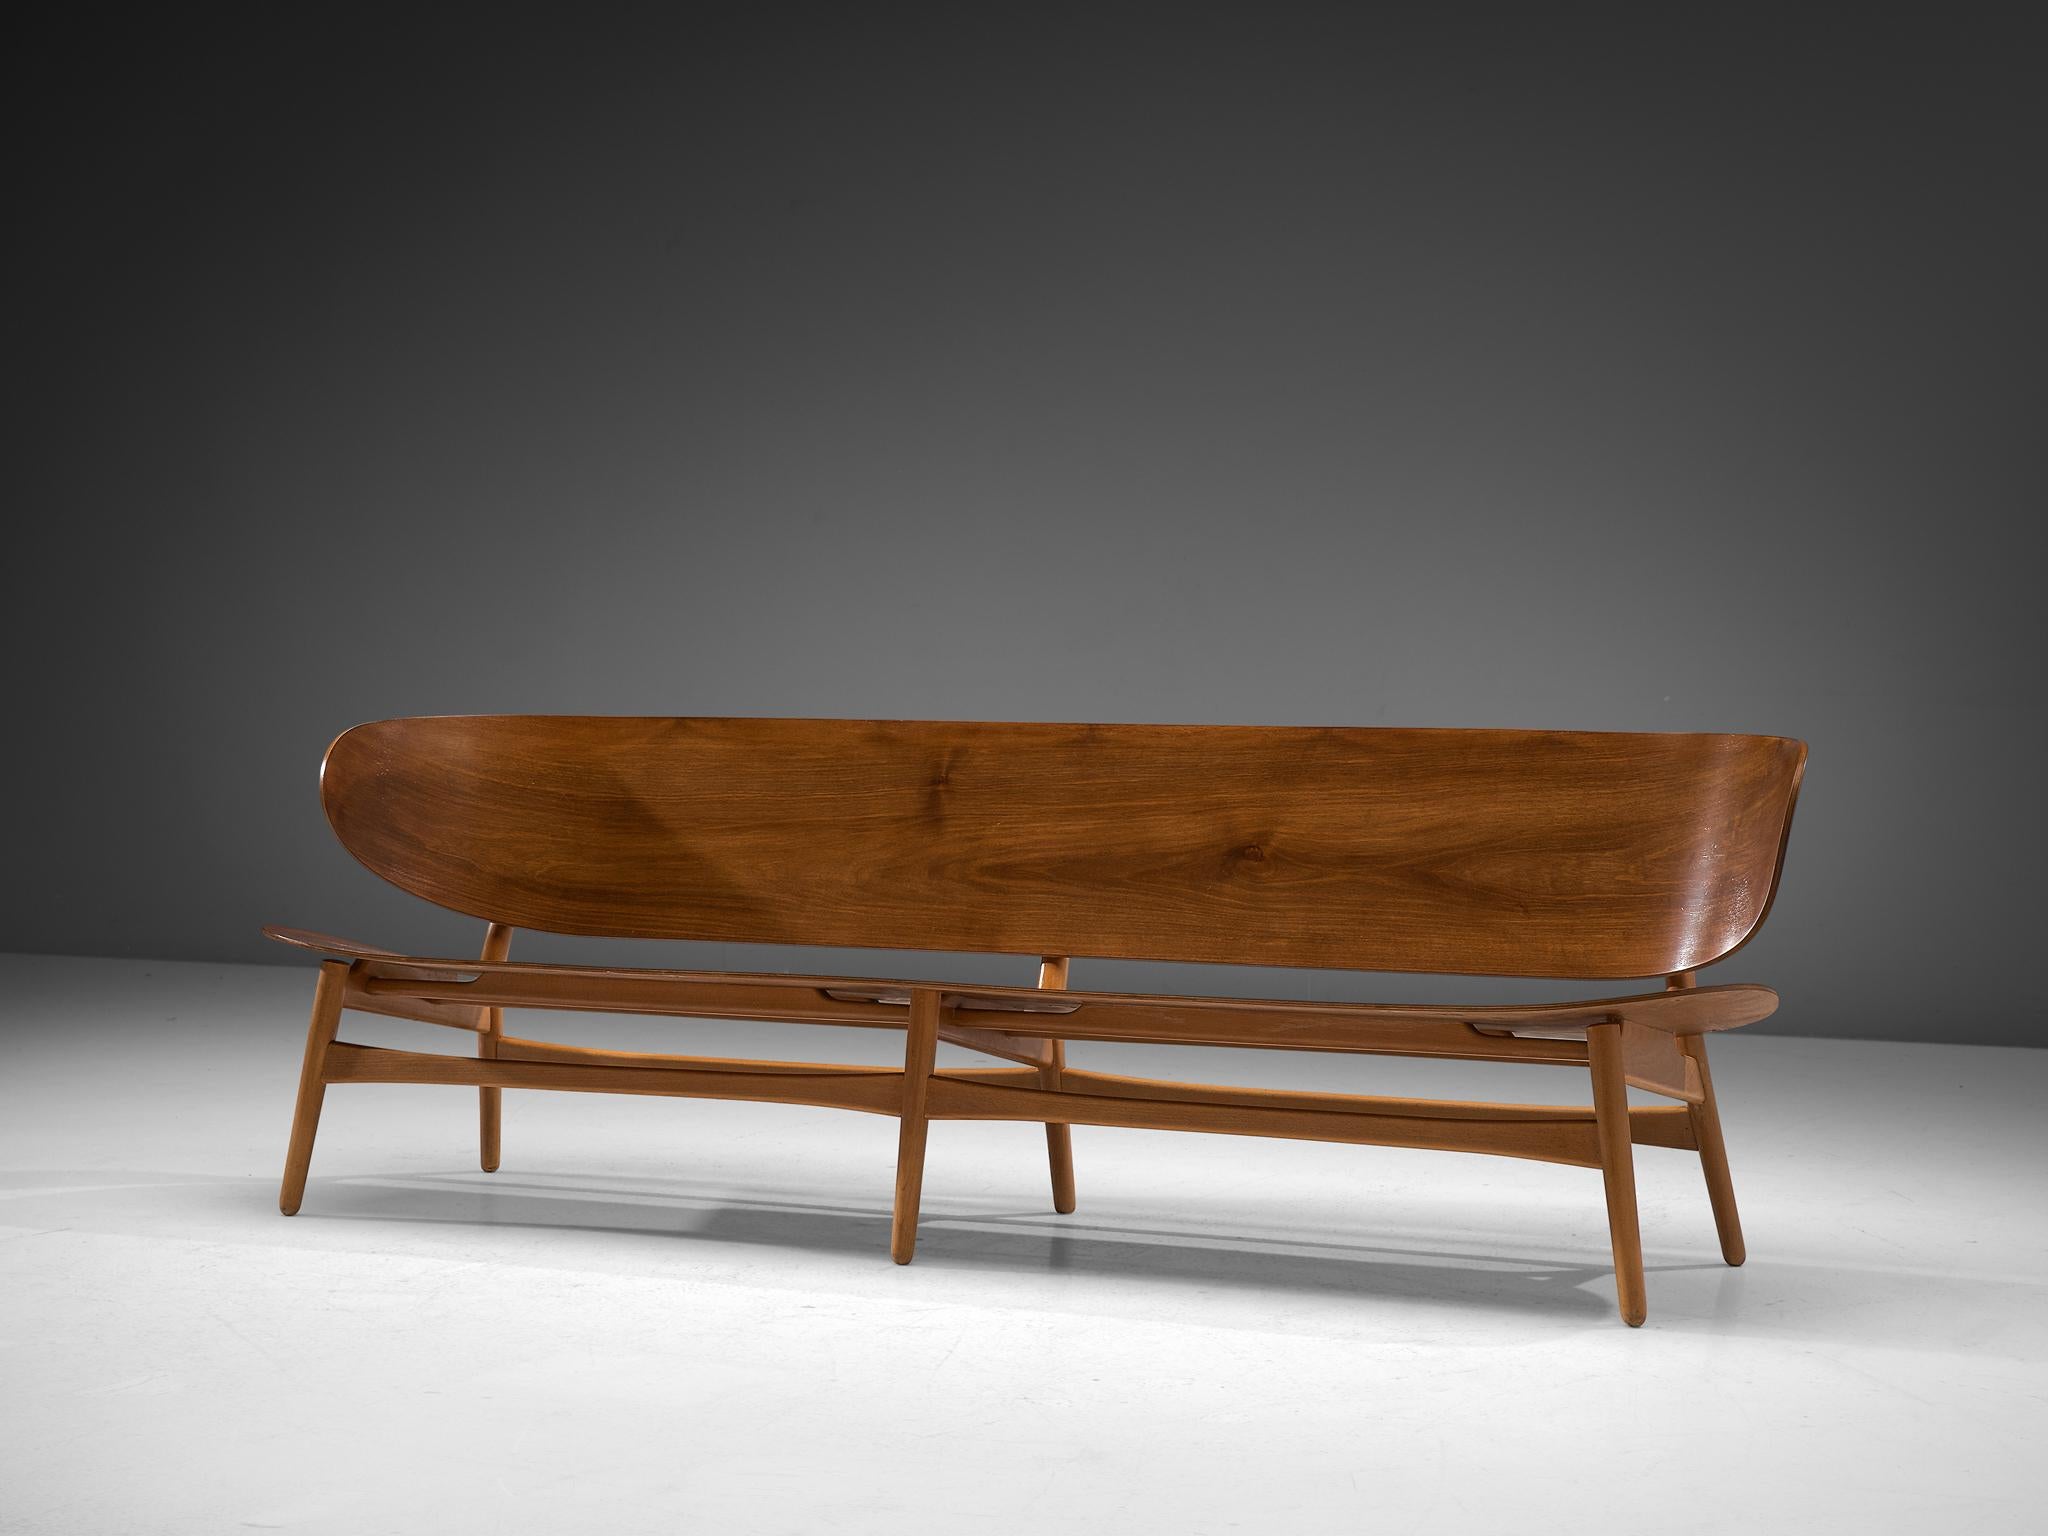 Hans J. Wegner for Fritz Hansen, FH 1935 bench, walnut and beech, Denmark, design 1948, manufactured circa 1950

This rare and largest version ever made of the FH 1935 bench with sofa appeal by Hans J. Wegner. This piece is one of the results of